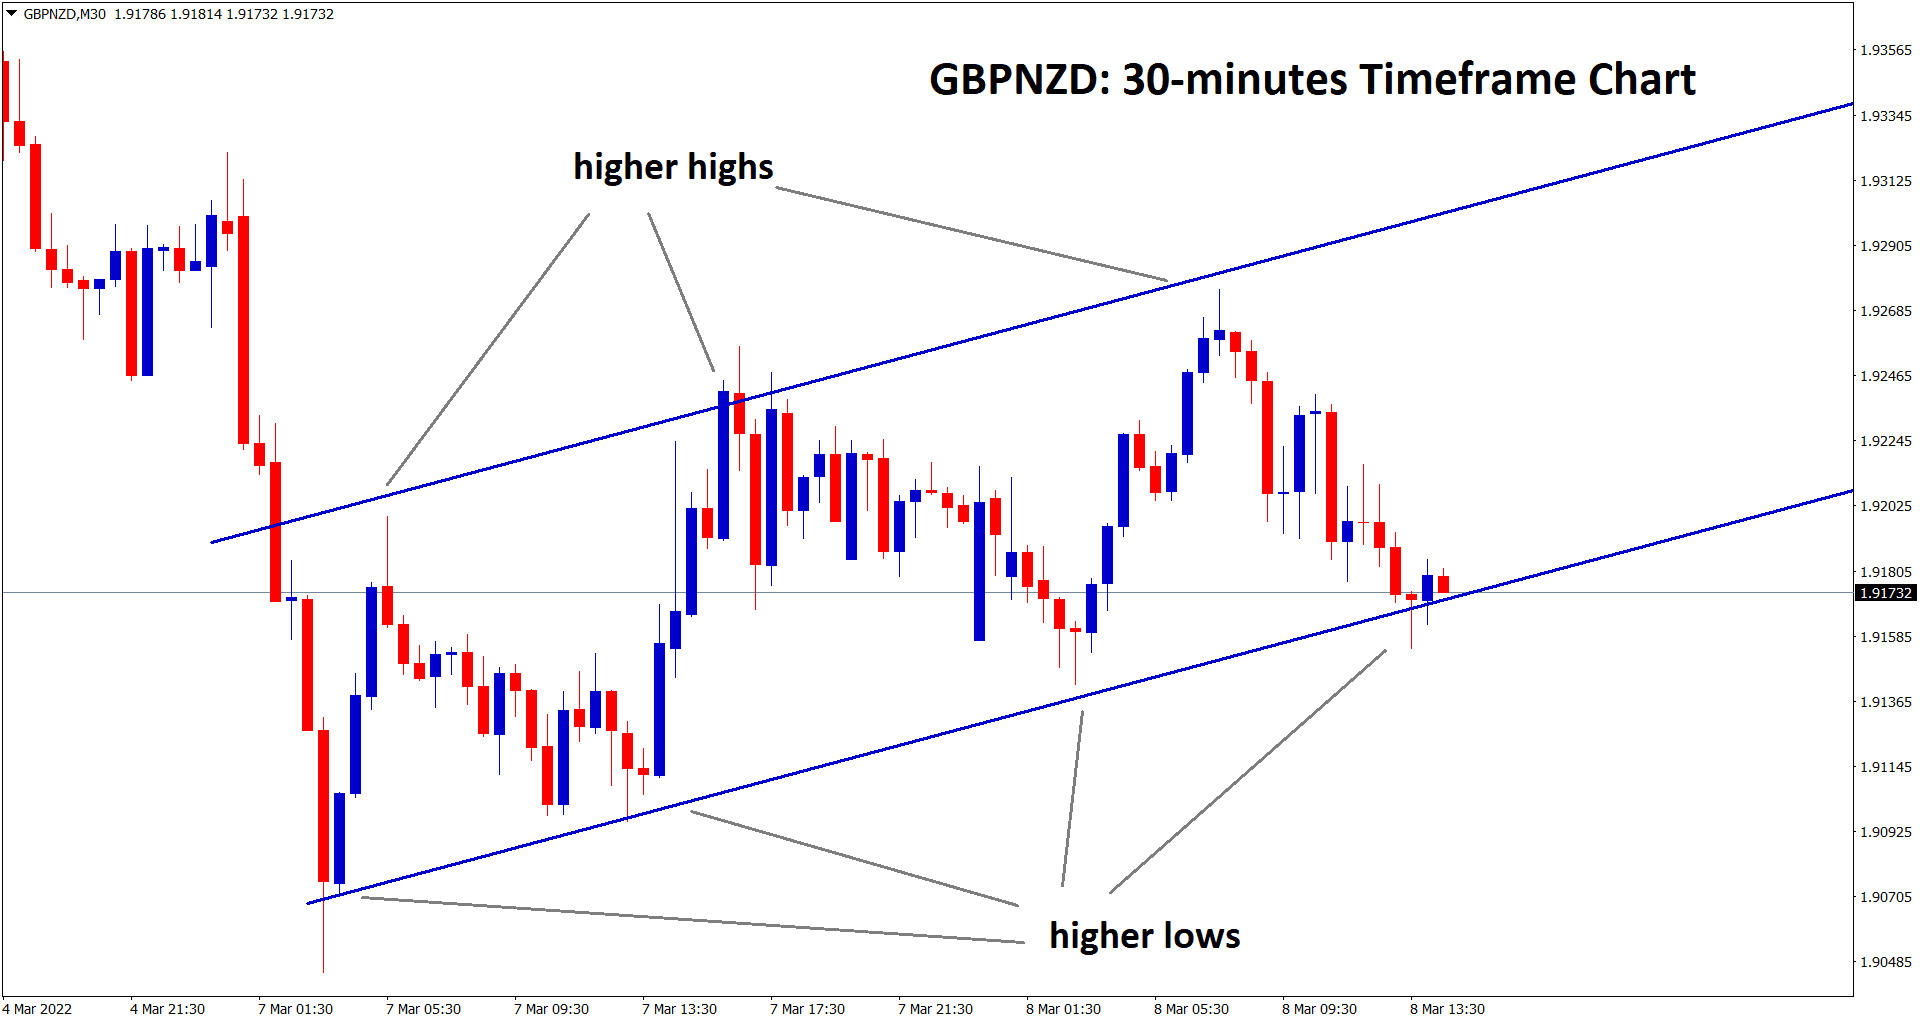 GBPNZD reached the higher low of the ascending channel line